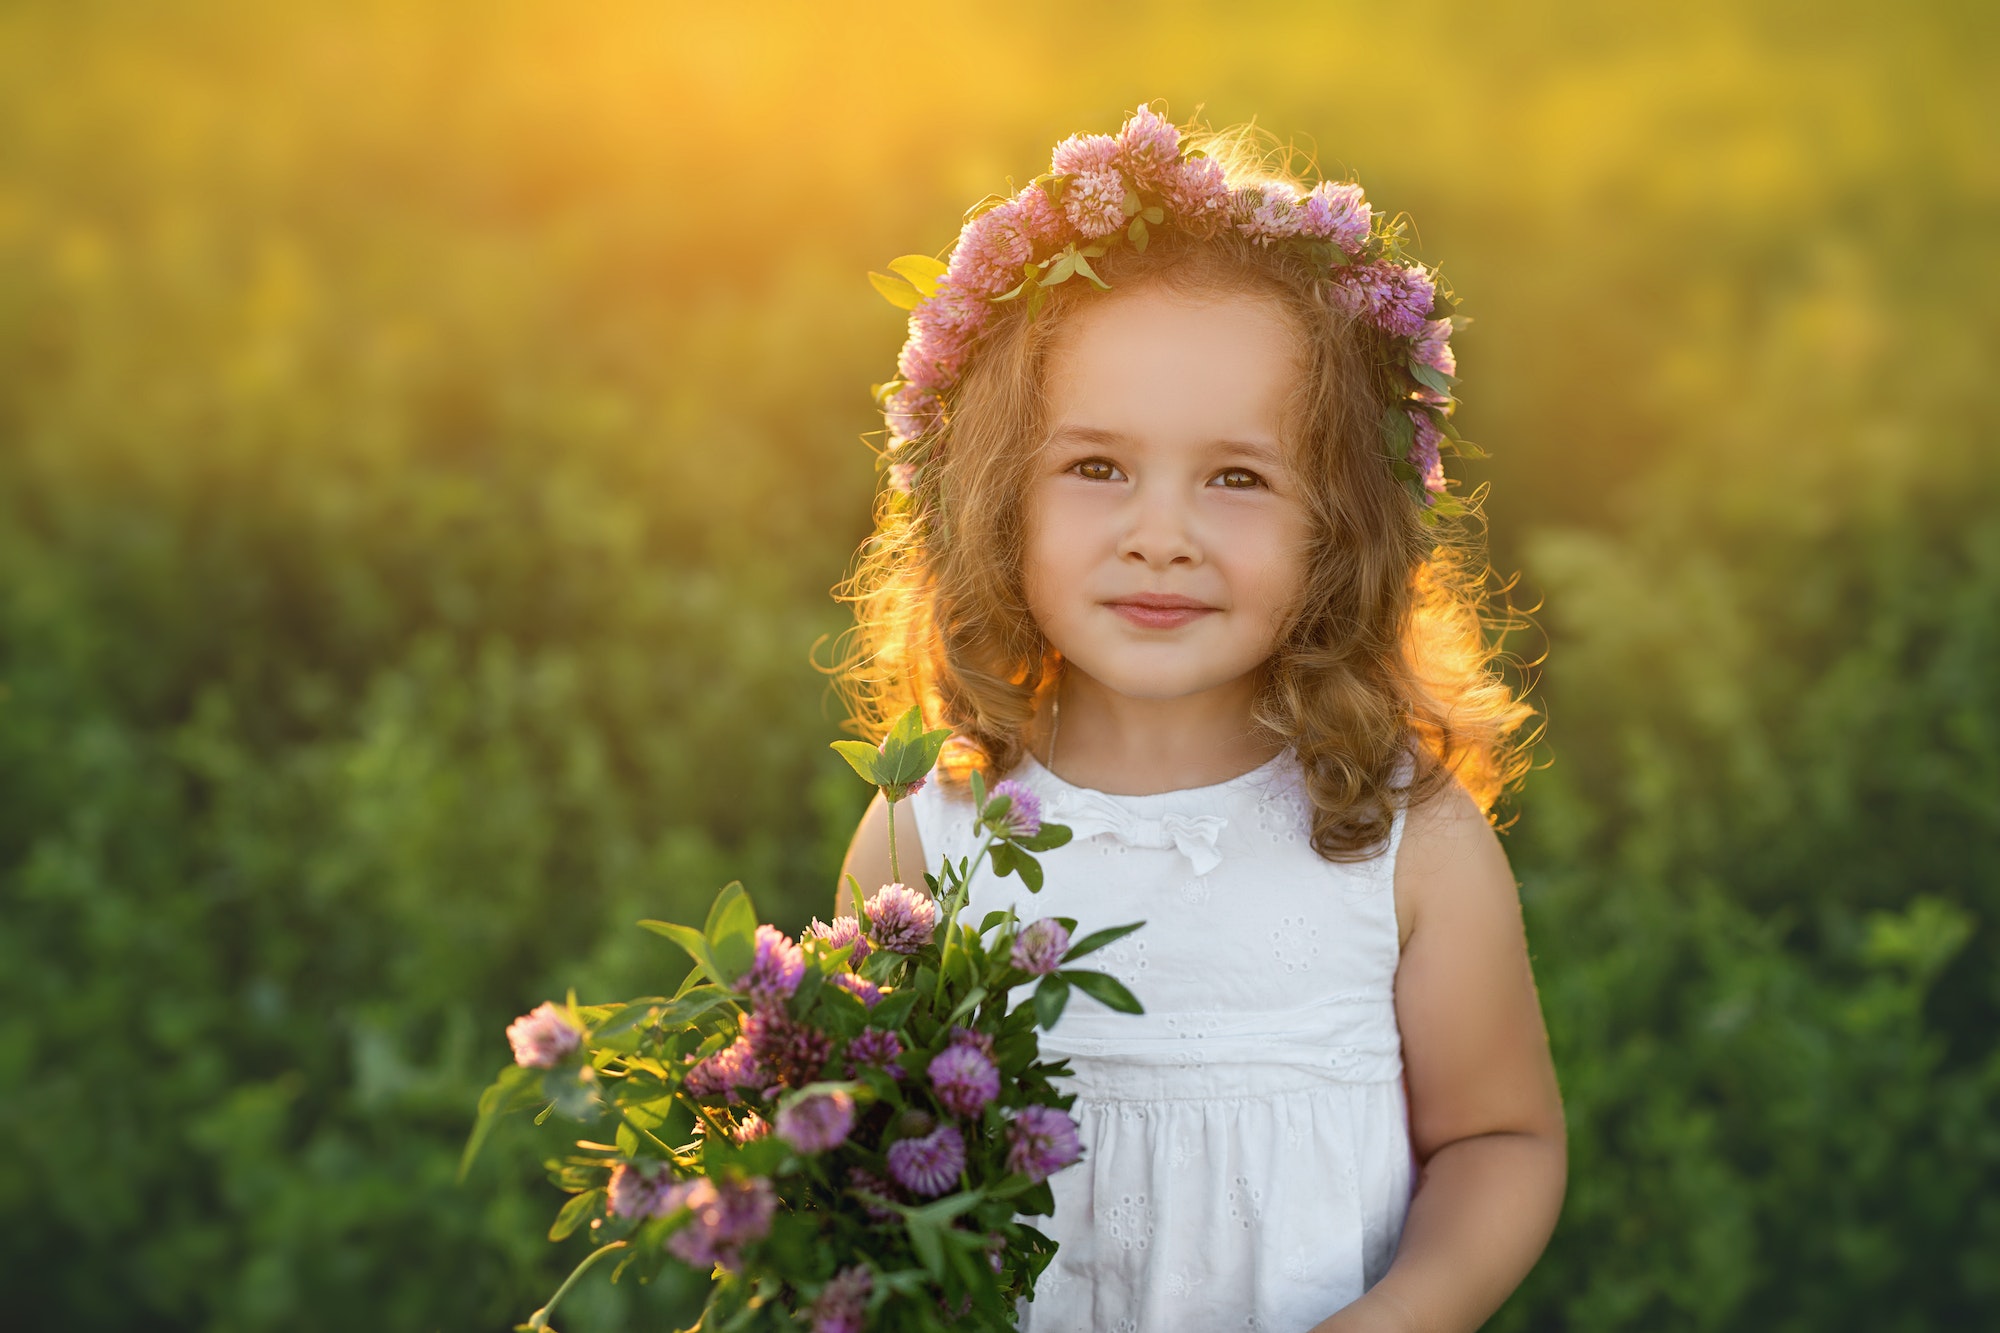 A bouquet of clover flowers in the hands of a child.